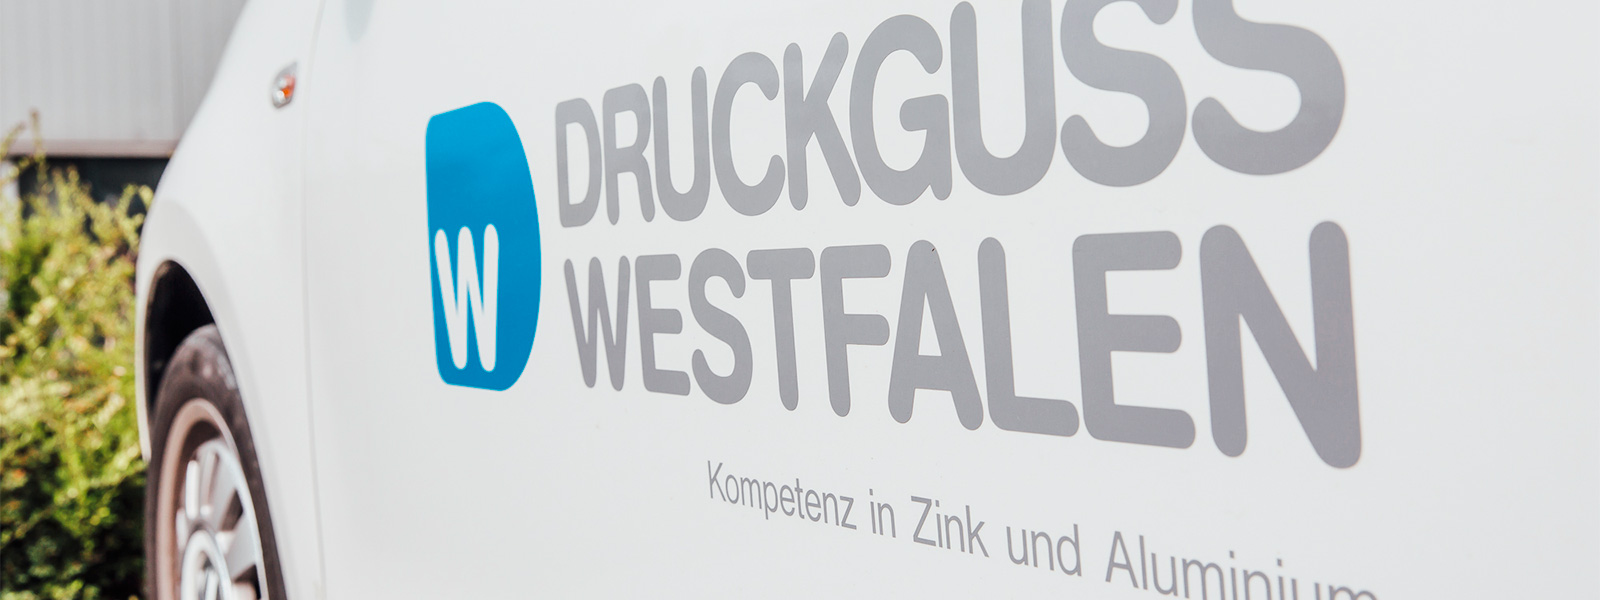 Delivery vehicle with Druckguss Westfalen logo and slogan, “Kompetenz in Zink und Aluminium” (“Expertise in zinc and aluminium”)